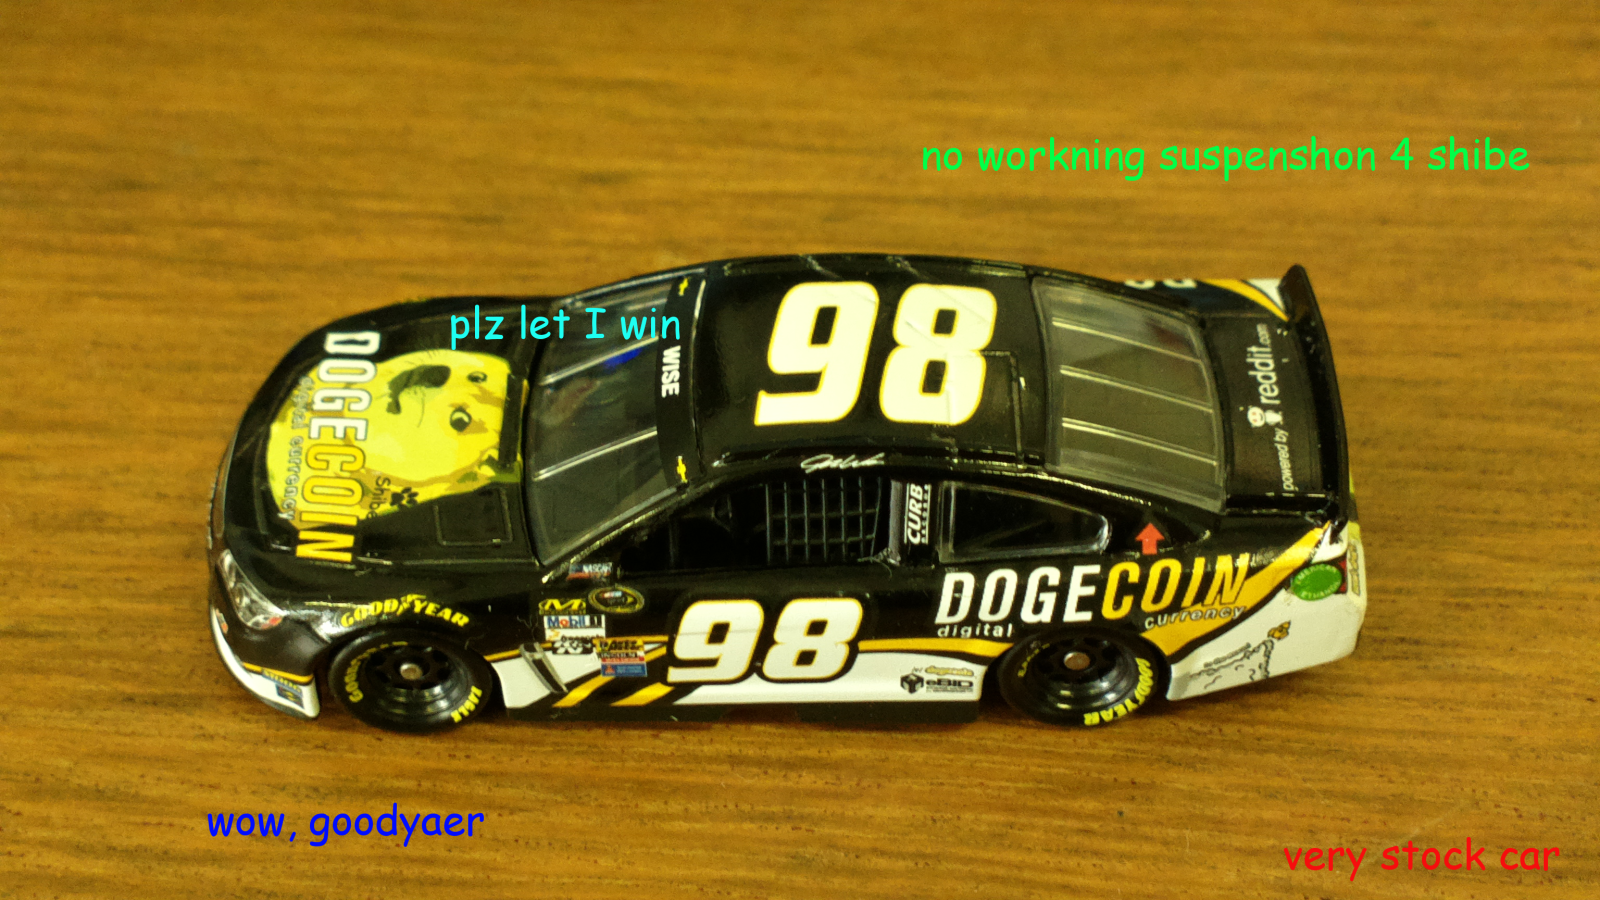 Illustration for article titled [Review] Lionel - Josh Wise #98 Chevrolet SS